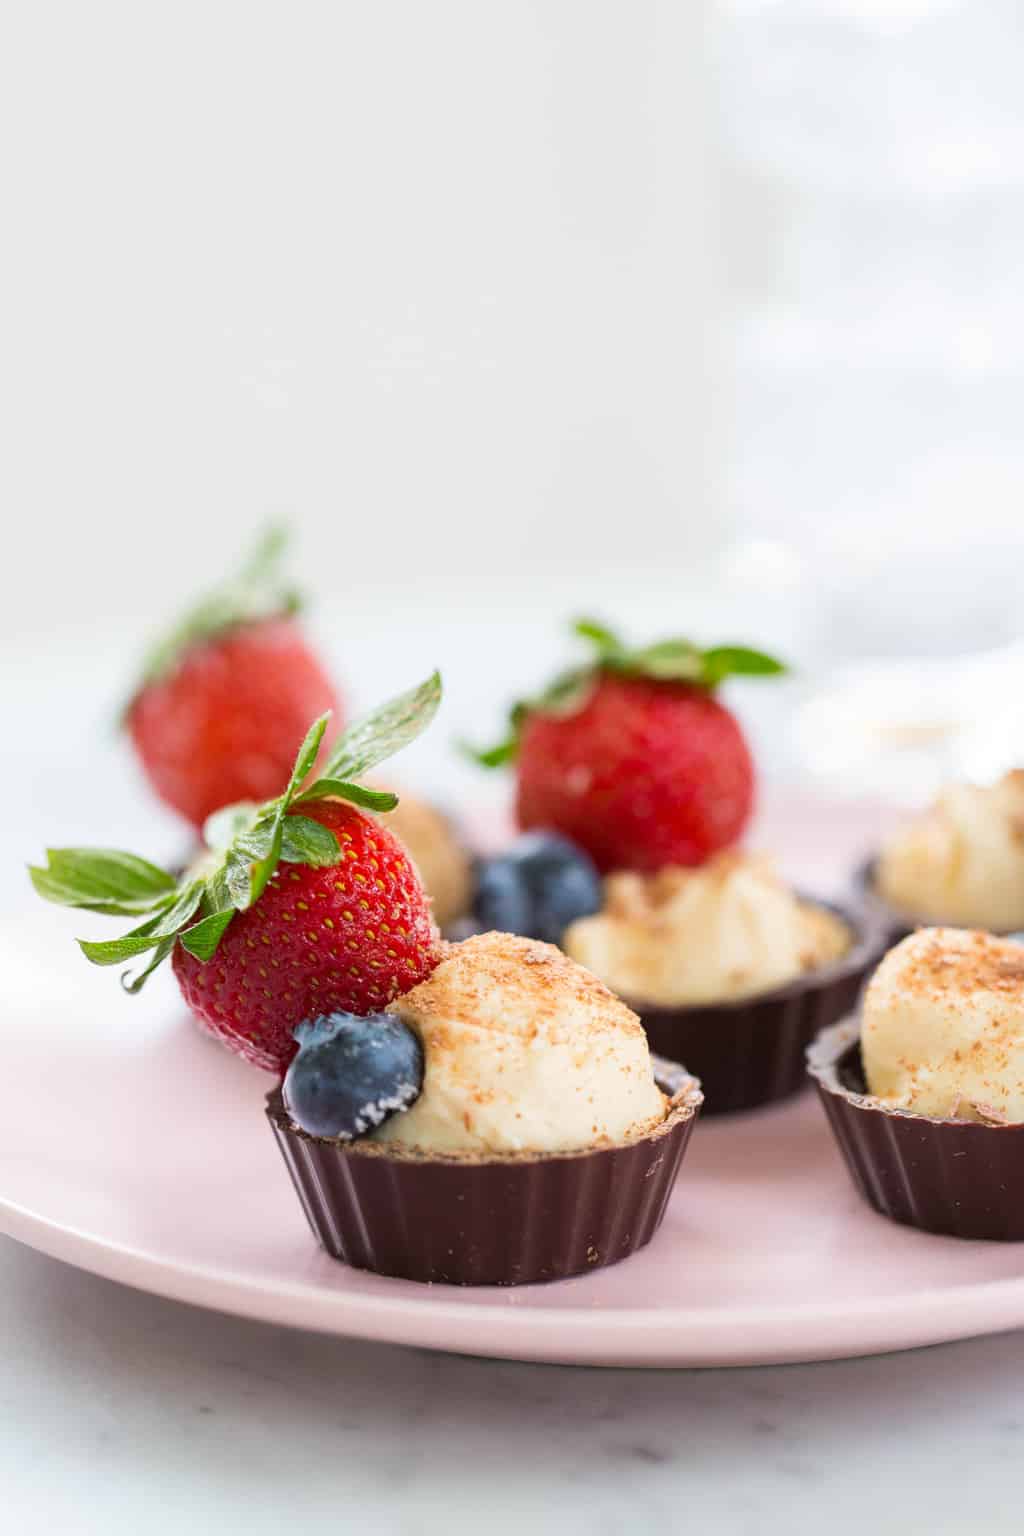 Chocolate Fruit Cheese Cup Recipe by top Houston blogger, Ashley Rose of Sugar and Cloth